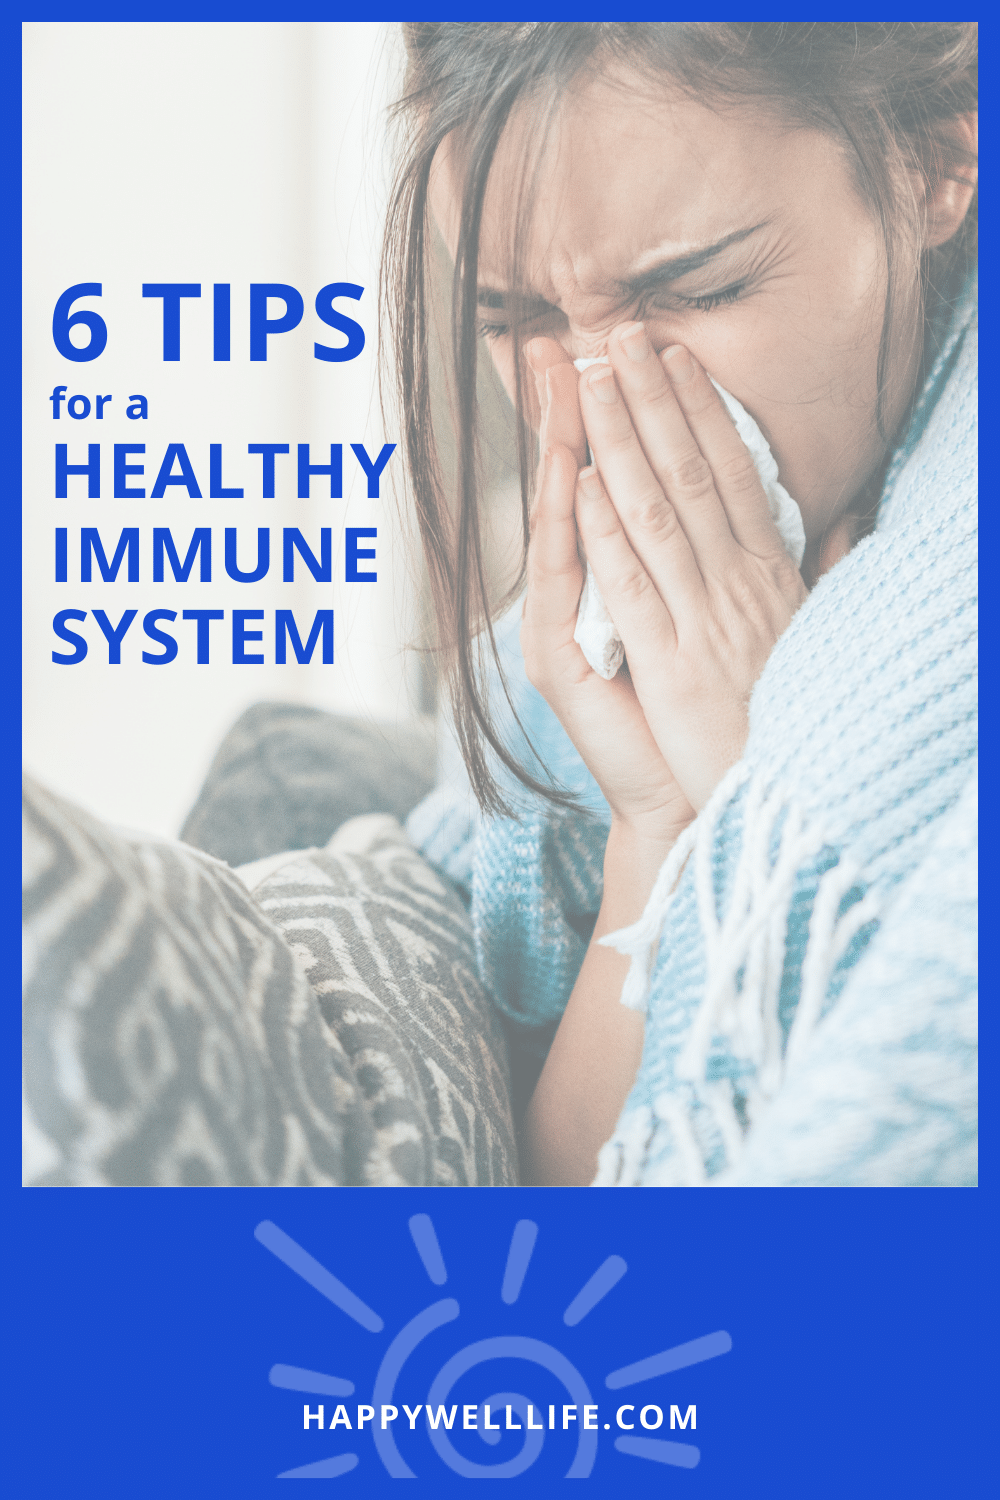 6 tips for a healthy immune system